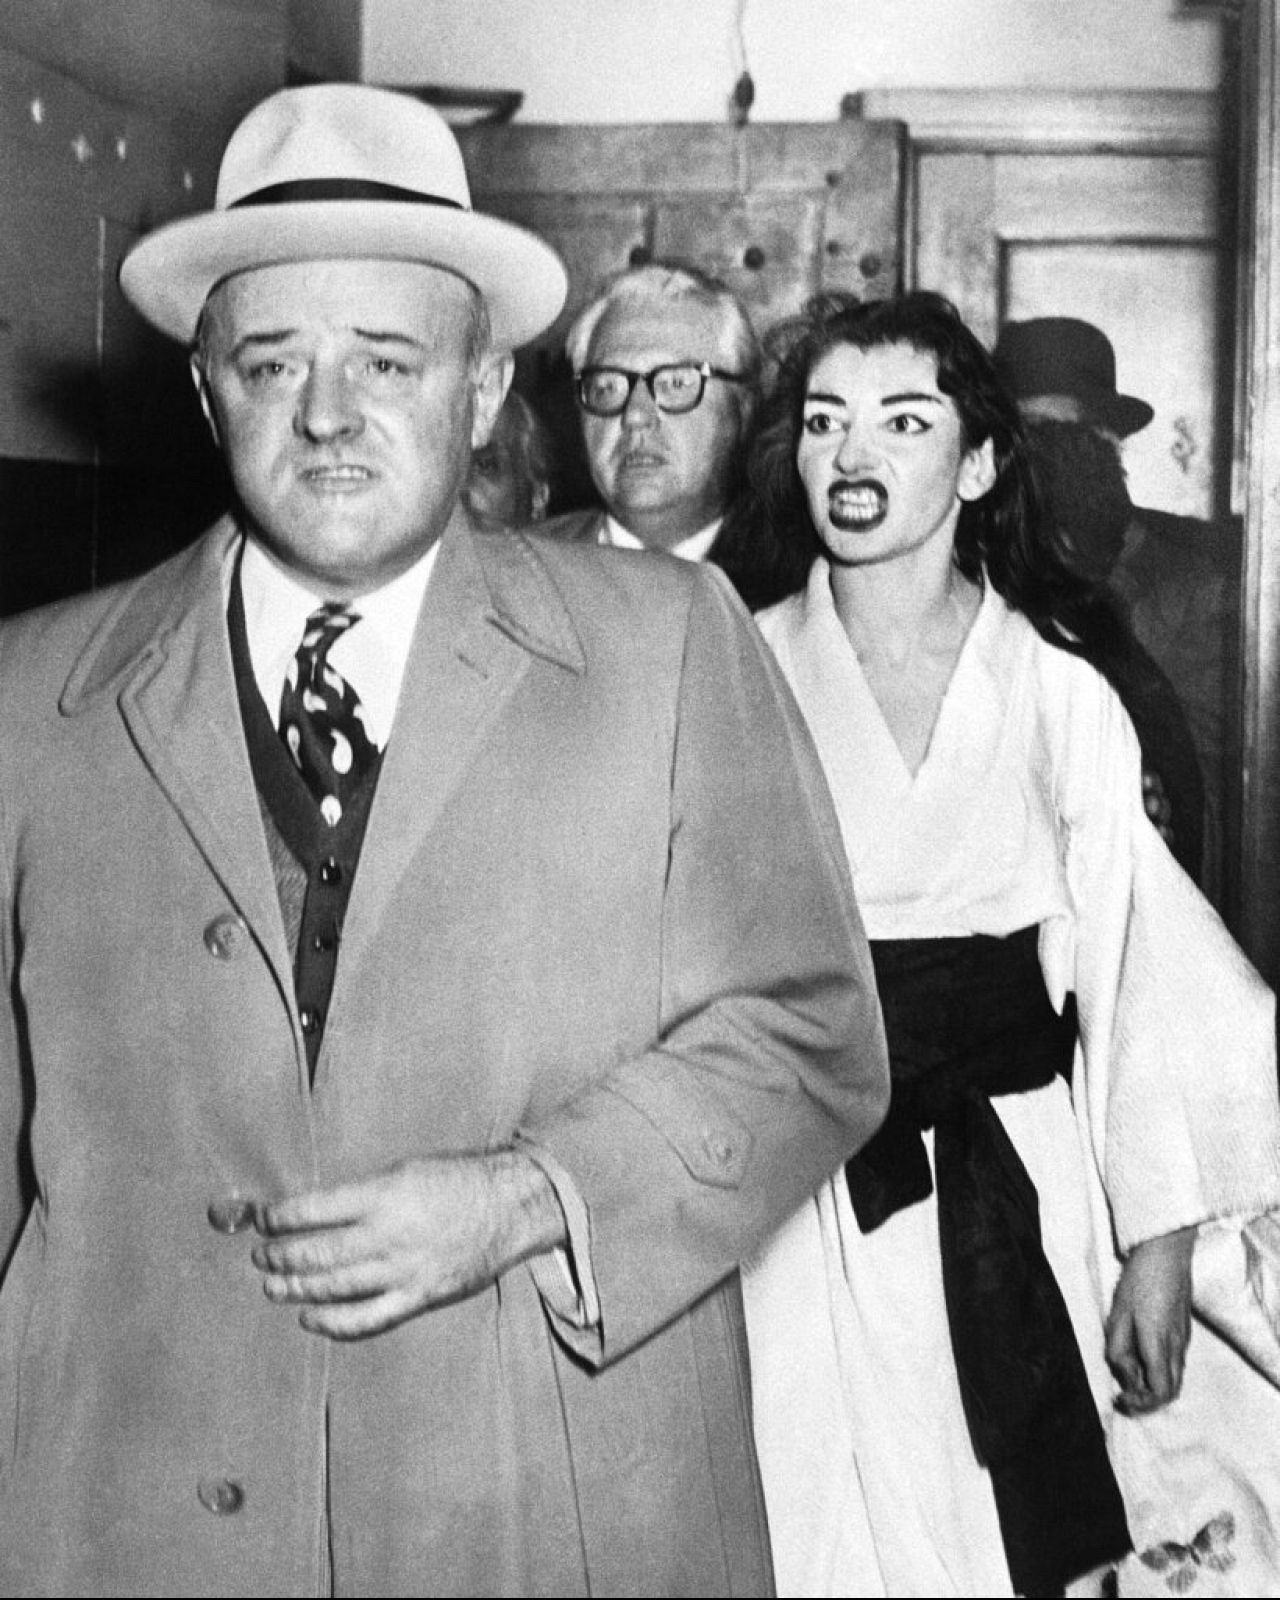 Callas confronts US Marshal Stanley Pringle, one of the servers trying to serve her summonses after her final "Madame Butterfly" performance at Civic Opera House, Chicago.